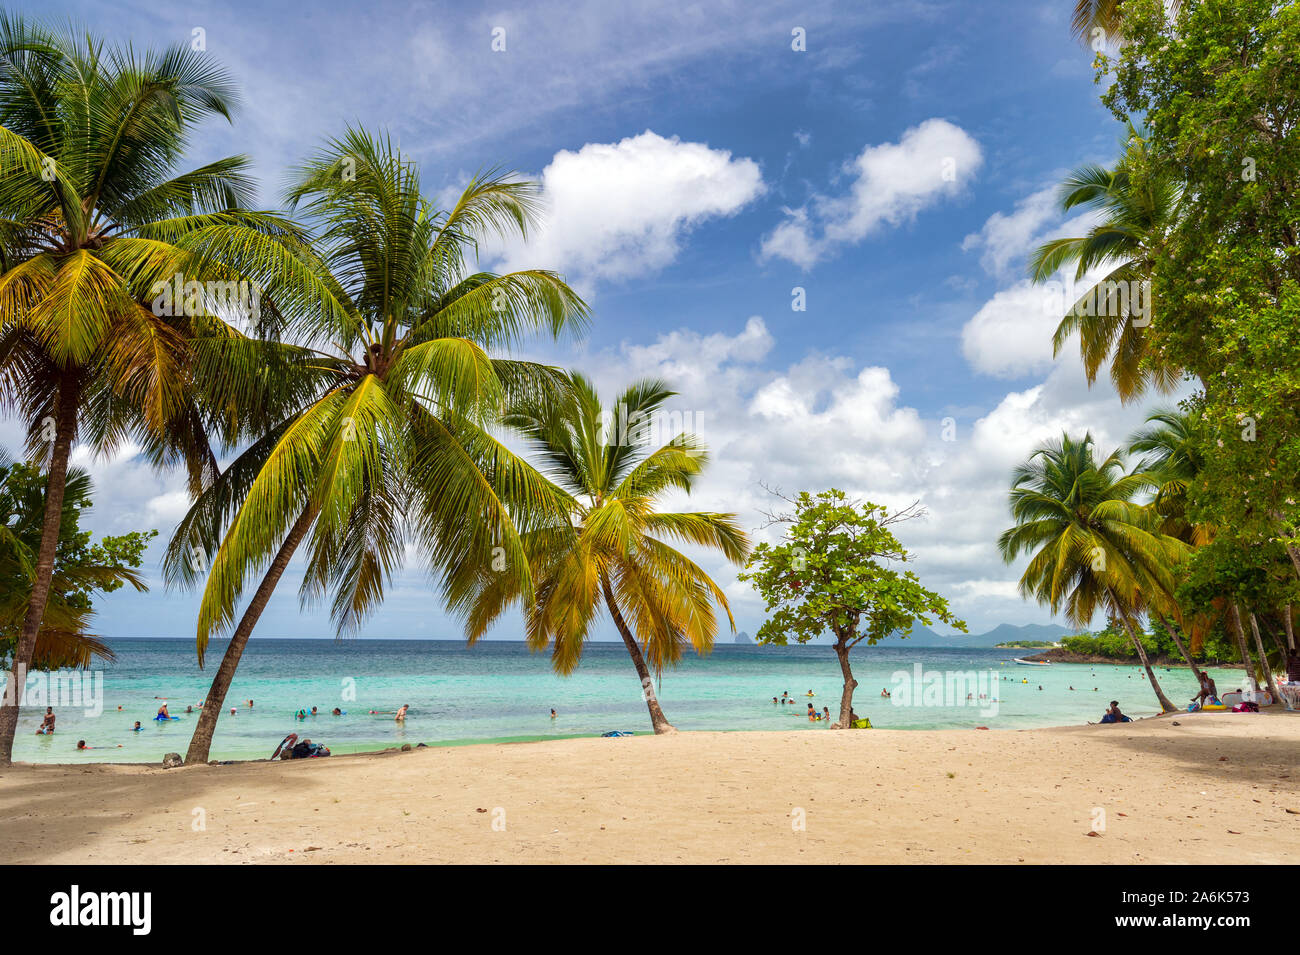 Anse Figuier, Martinique, France - 14 August 2019: Anse Figuier Tropical Beach in Martinique Stock Photo